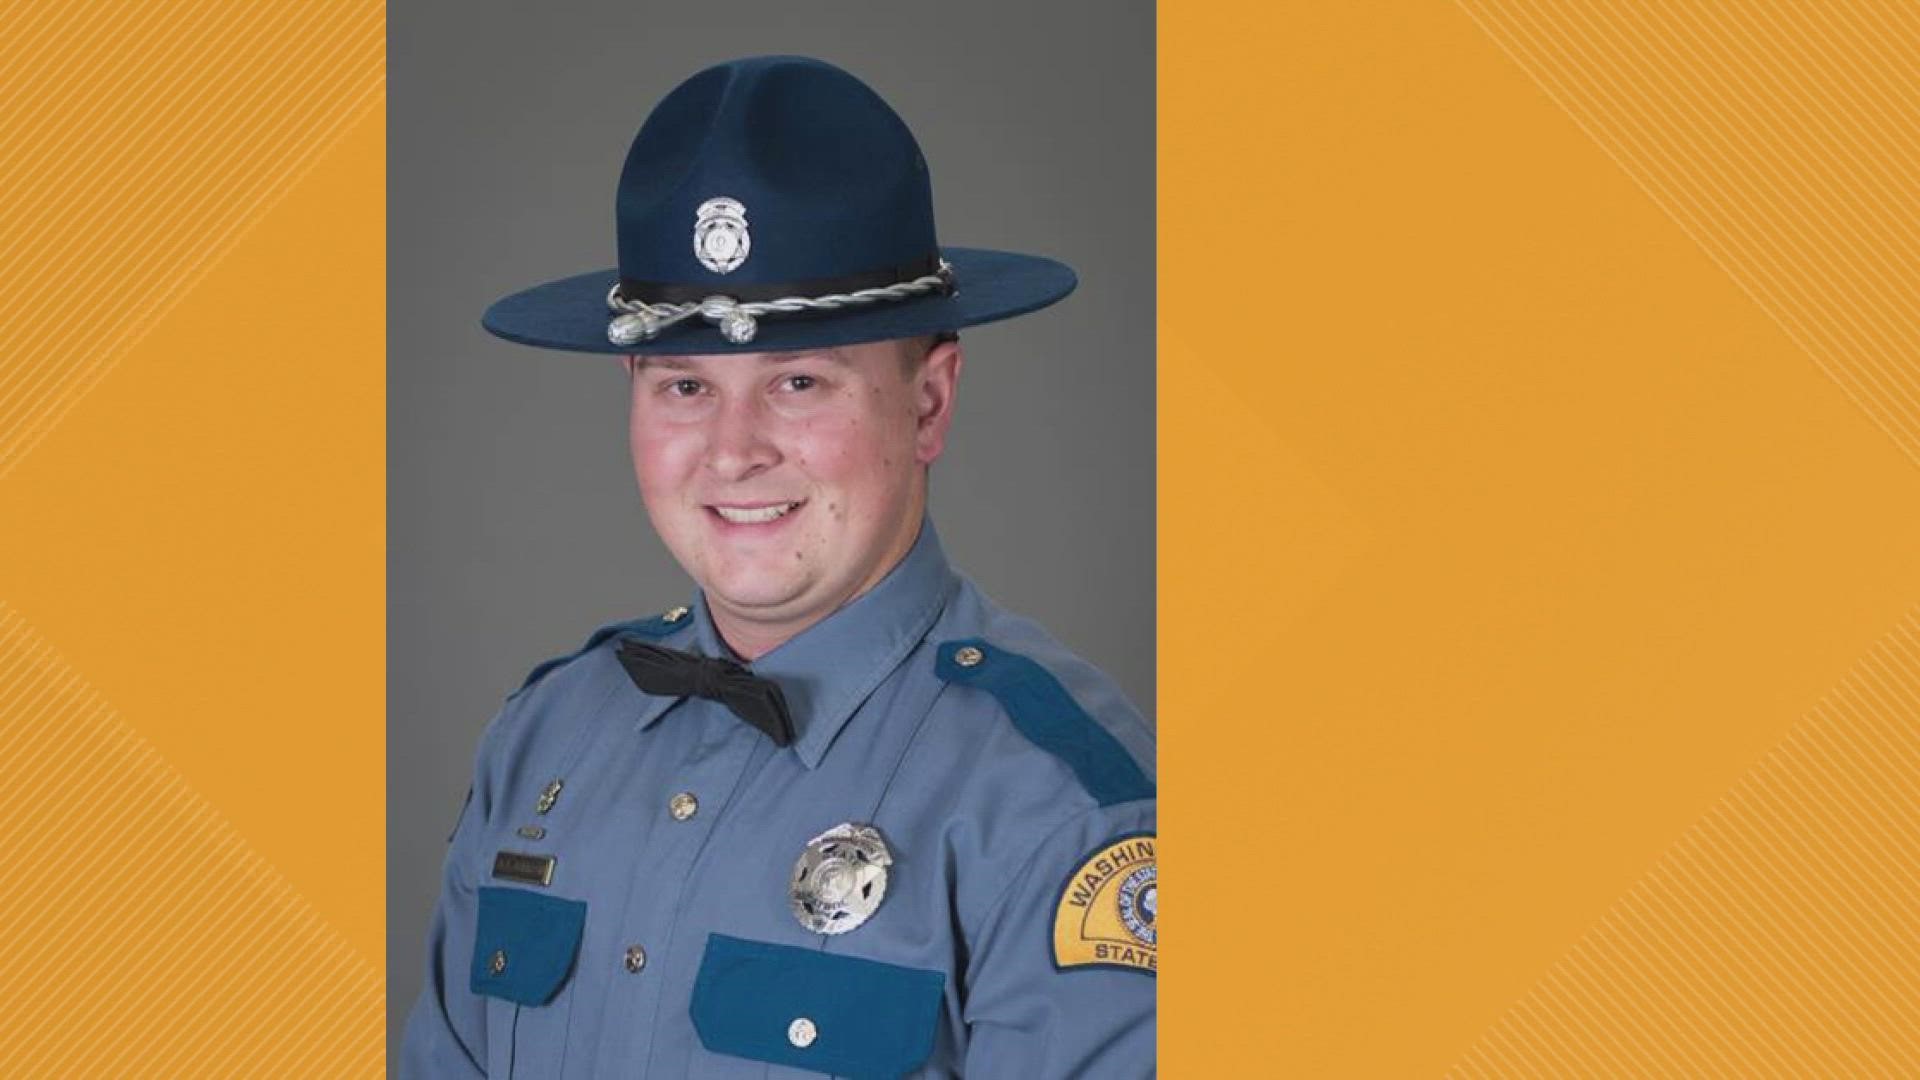 A Washington State Patrol Trooper is in stable condition after he was shot while attempting to apprehend a shooting suspect in Walla Walla.